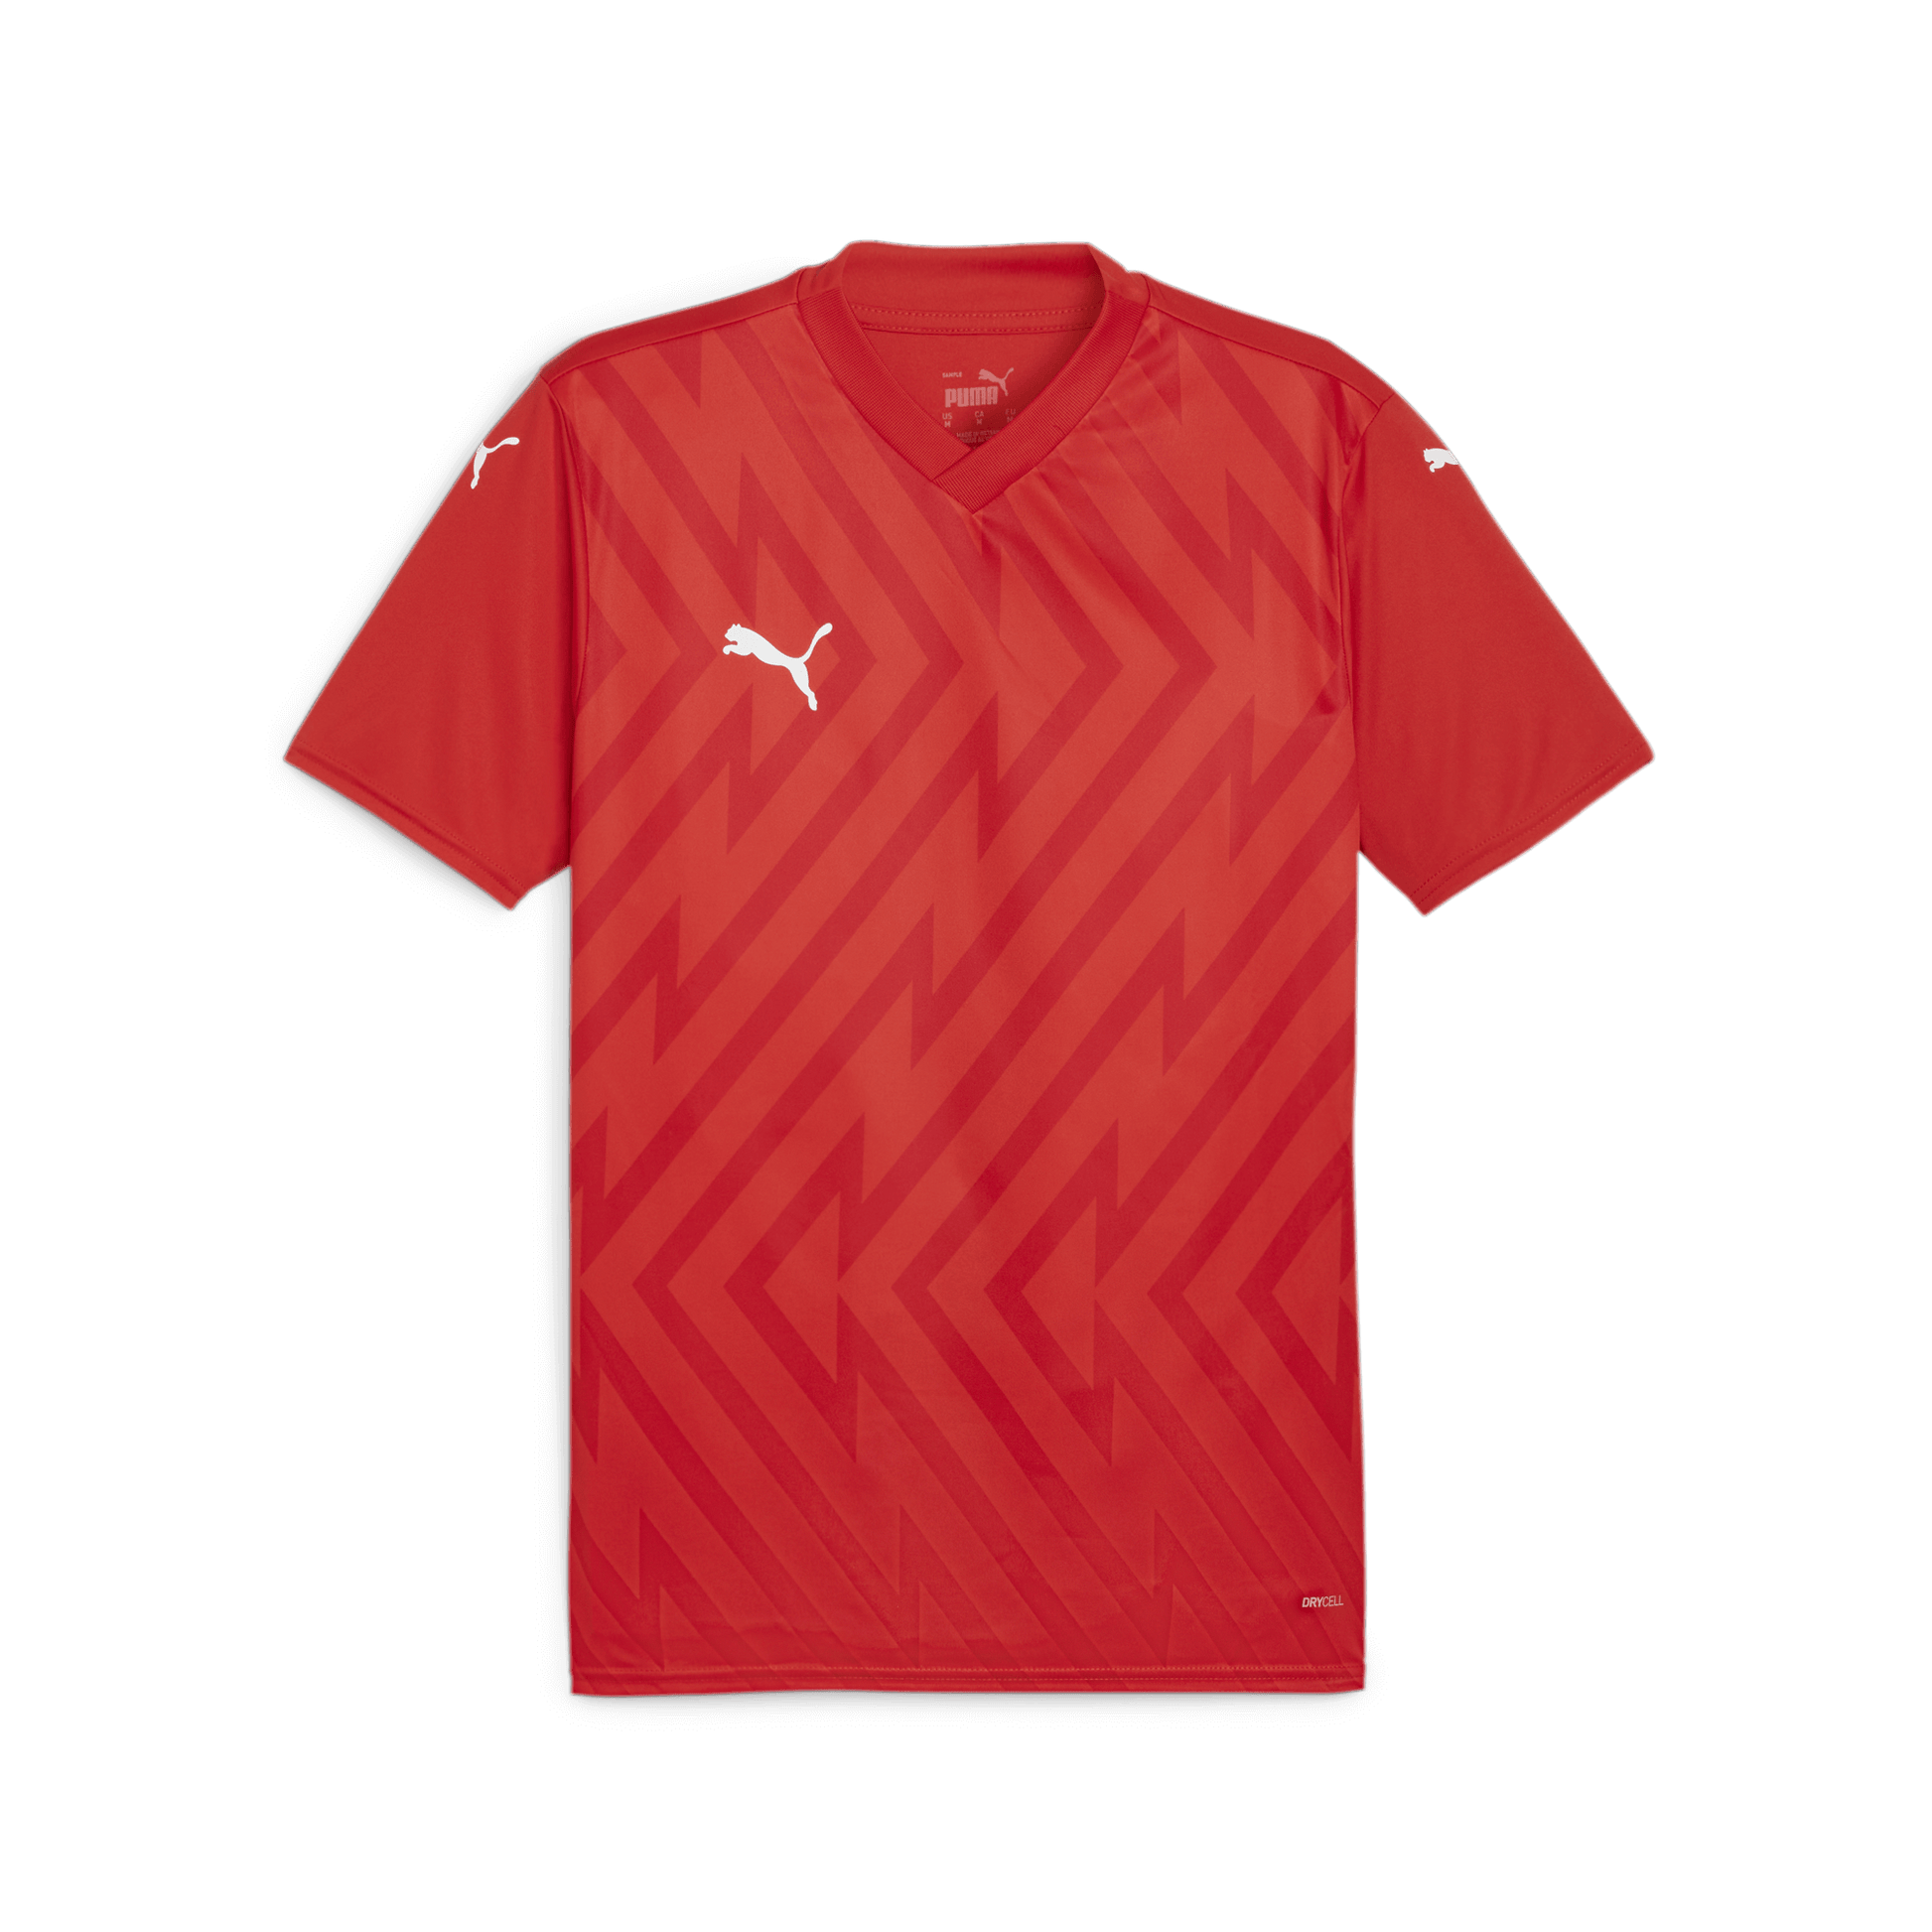 Puma Team Glory 26 Jersey-Puma Red-Puma White-Strong Red (Front)